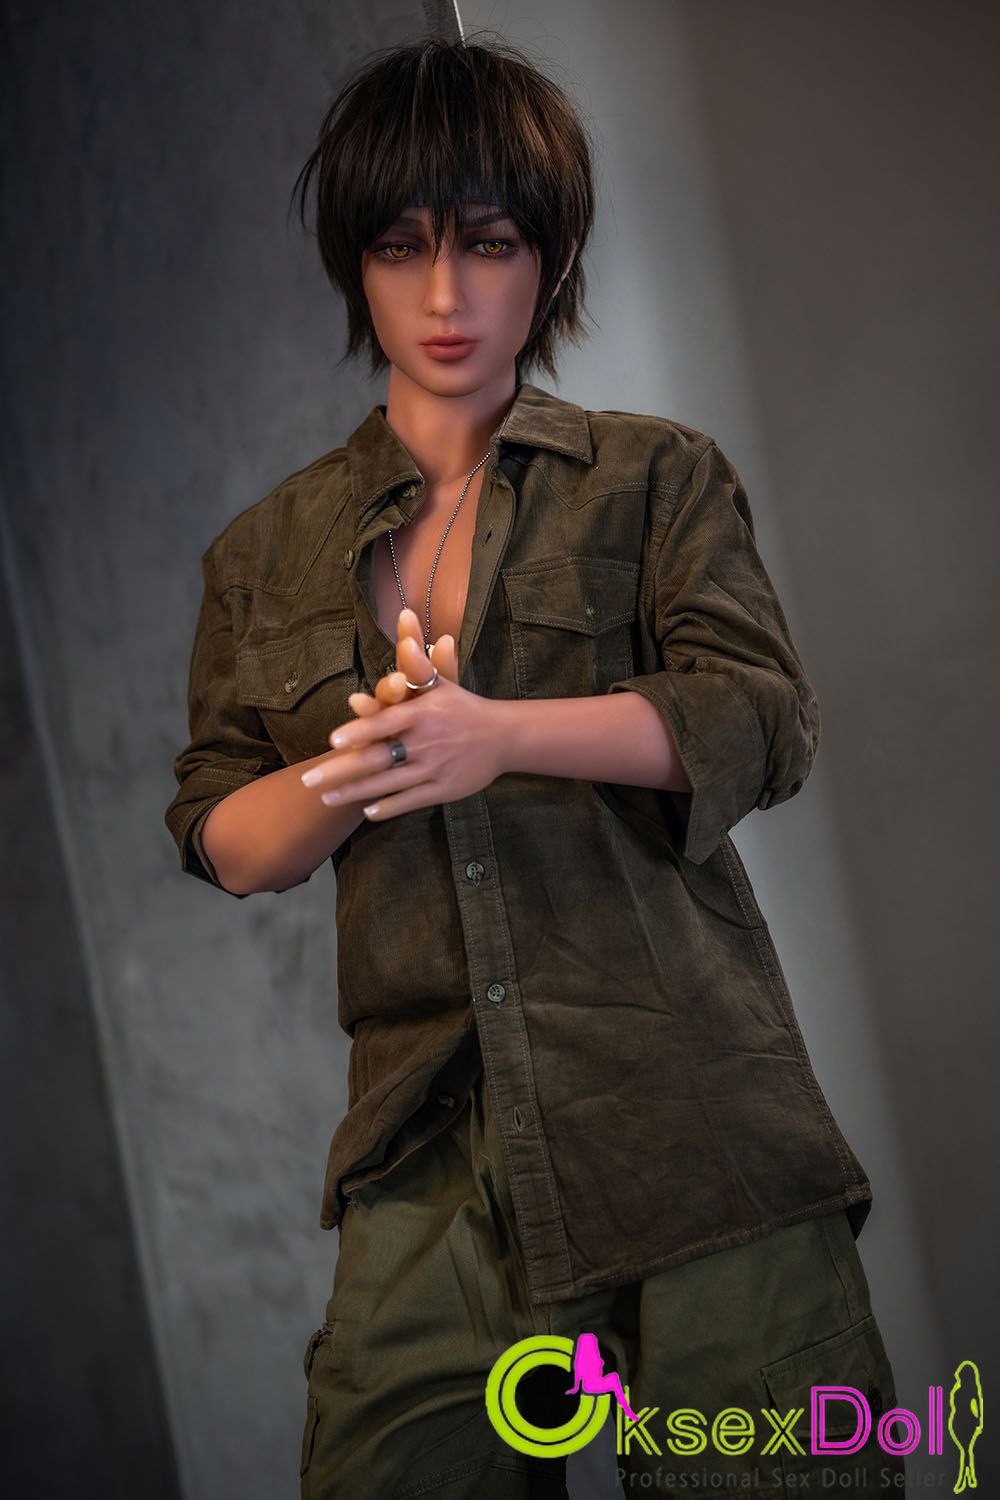 Cheap Male Sex Doll images